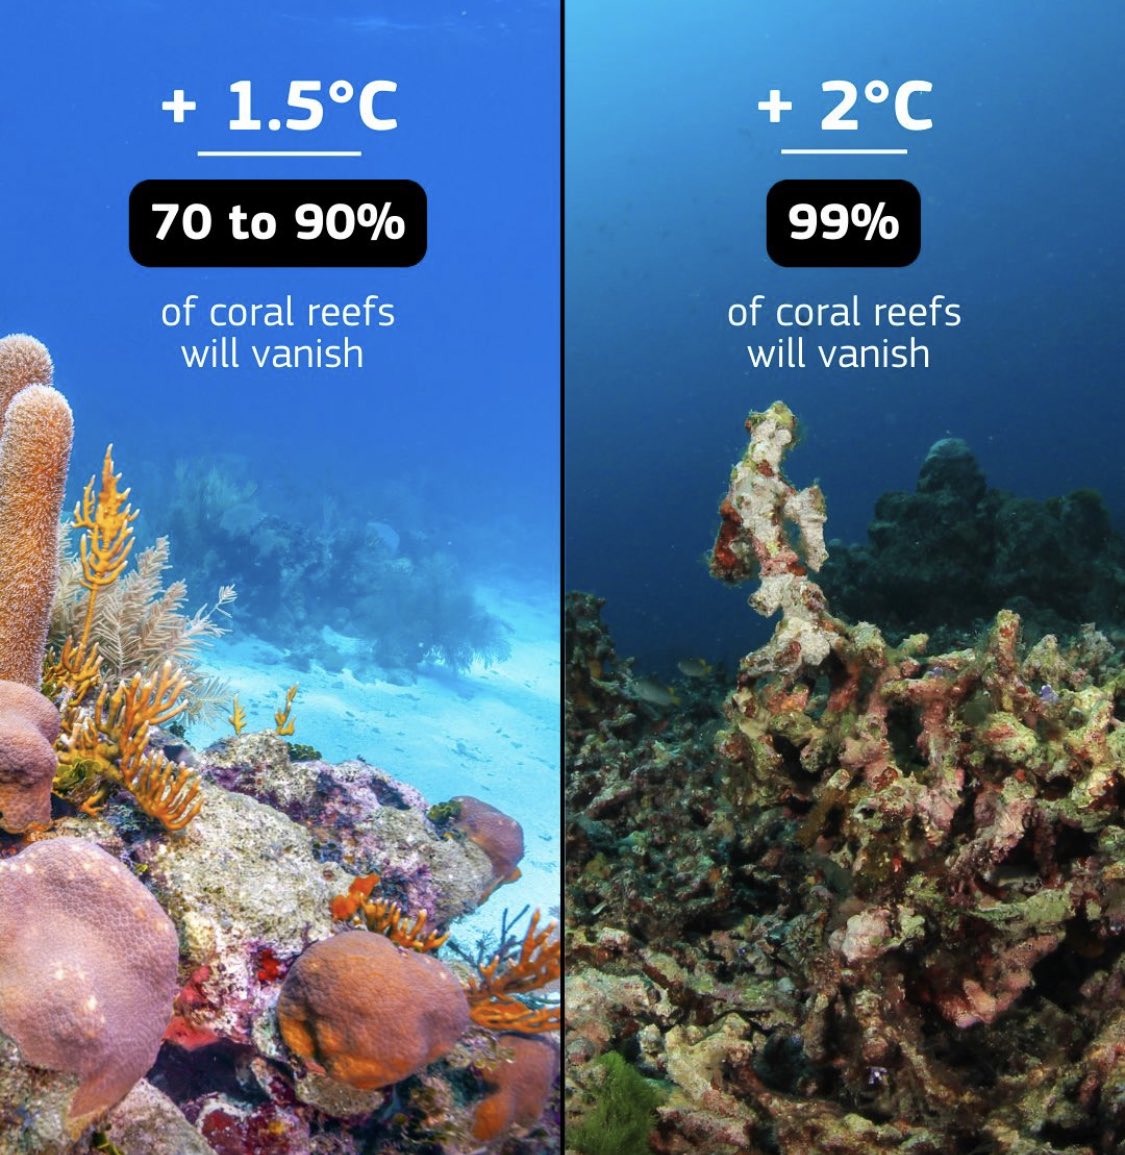 The thing is - the reefs are not waiting to magically cross these temperature boundaries. They are already dying and in many places it may already be too late. One thing is for sure - this summer may give us a stark view of this apocalyptic prediction.